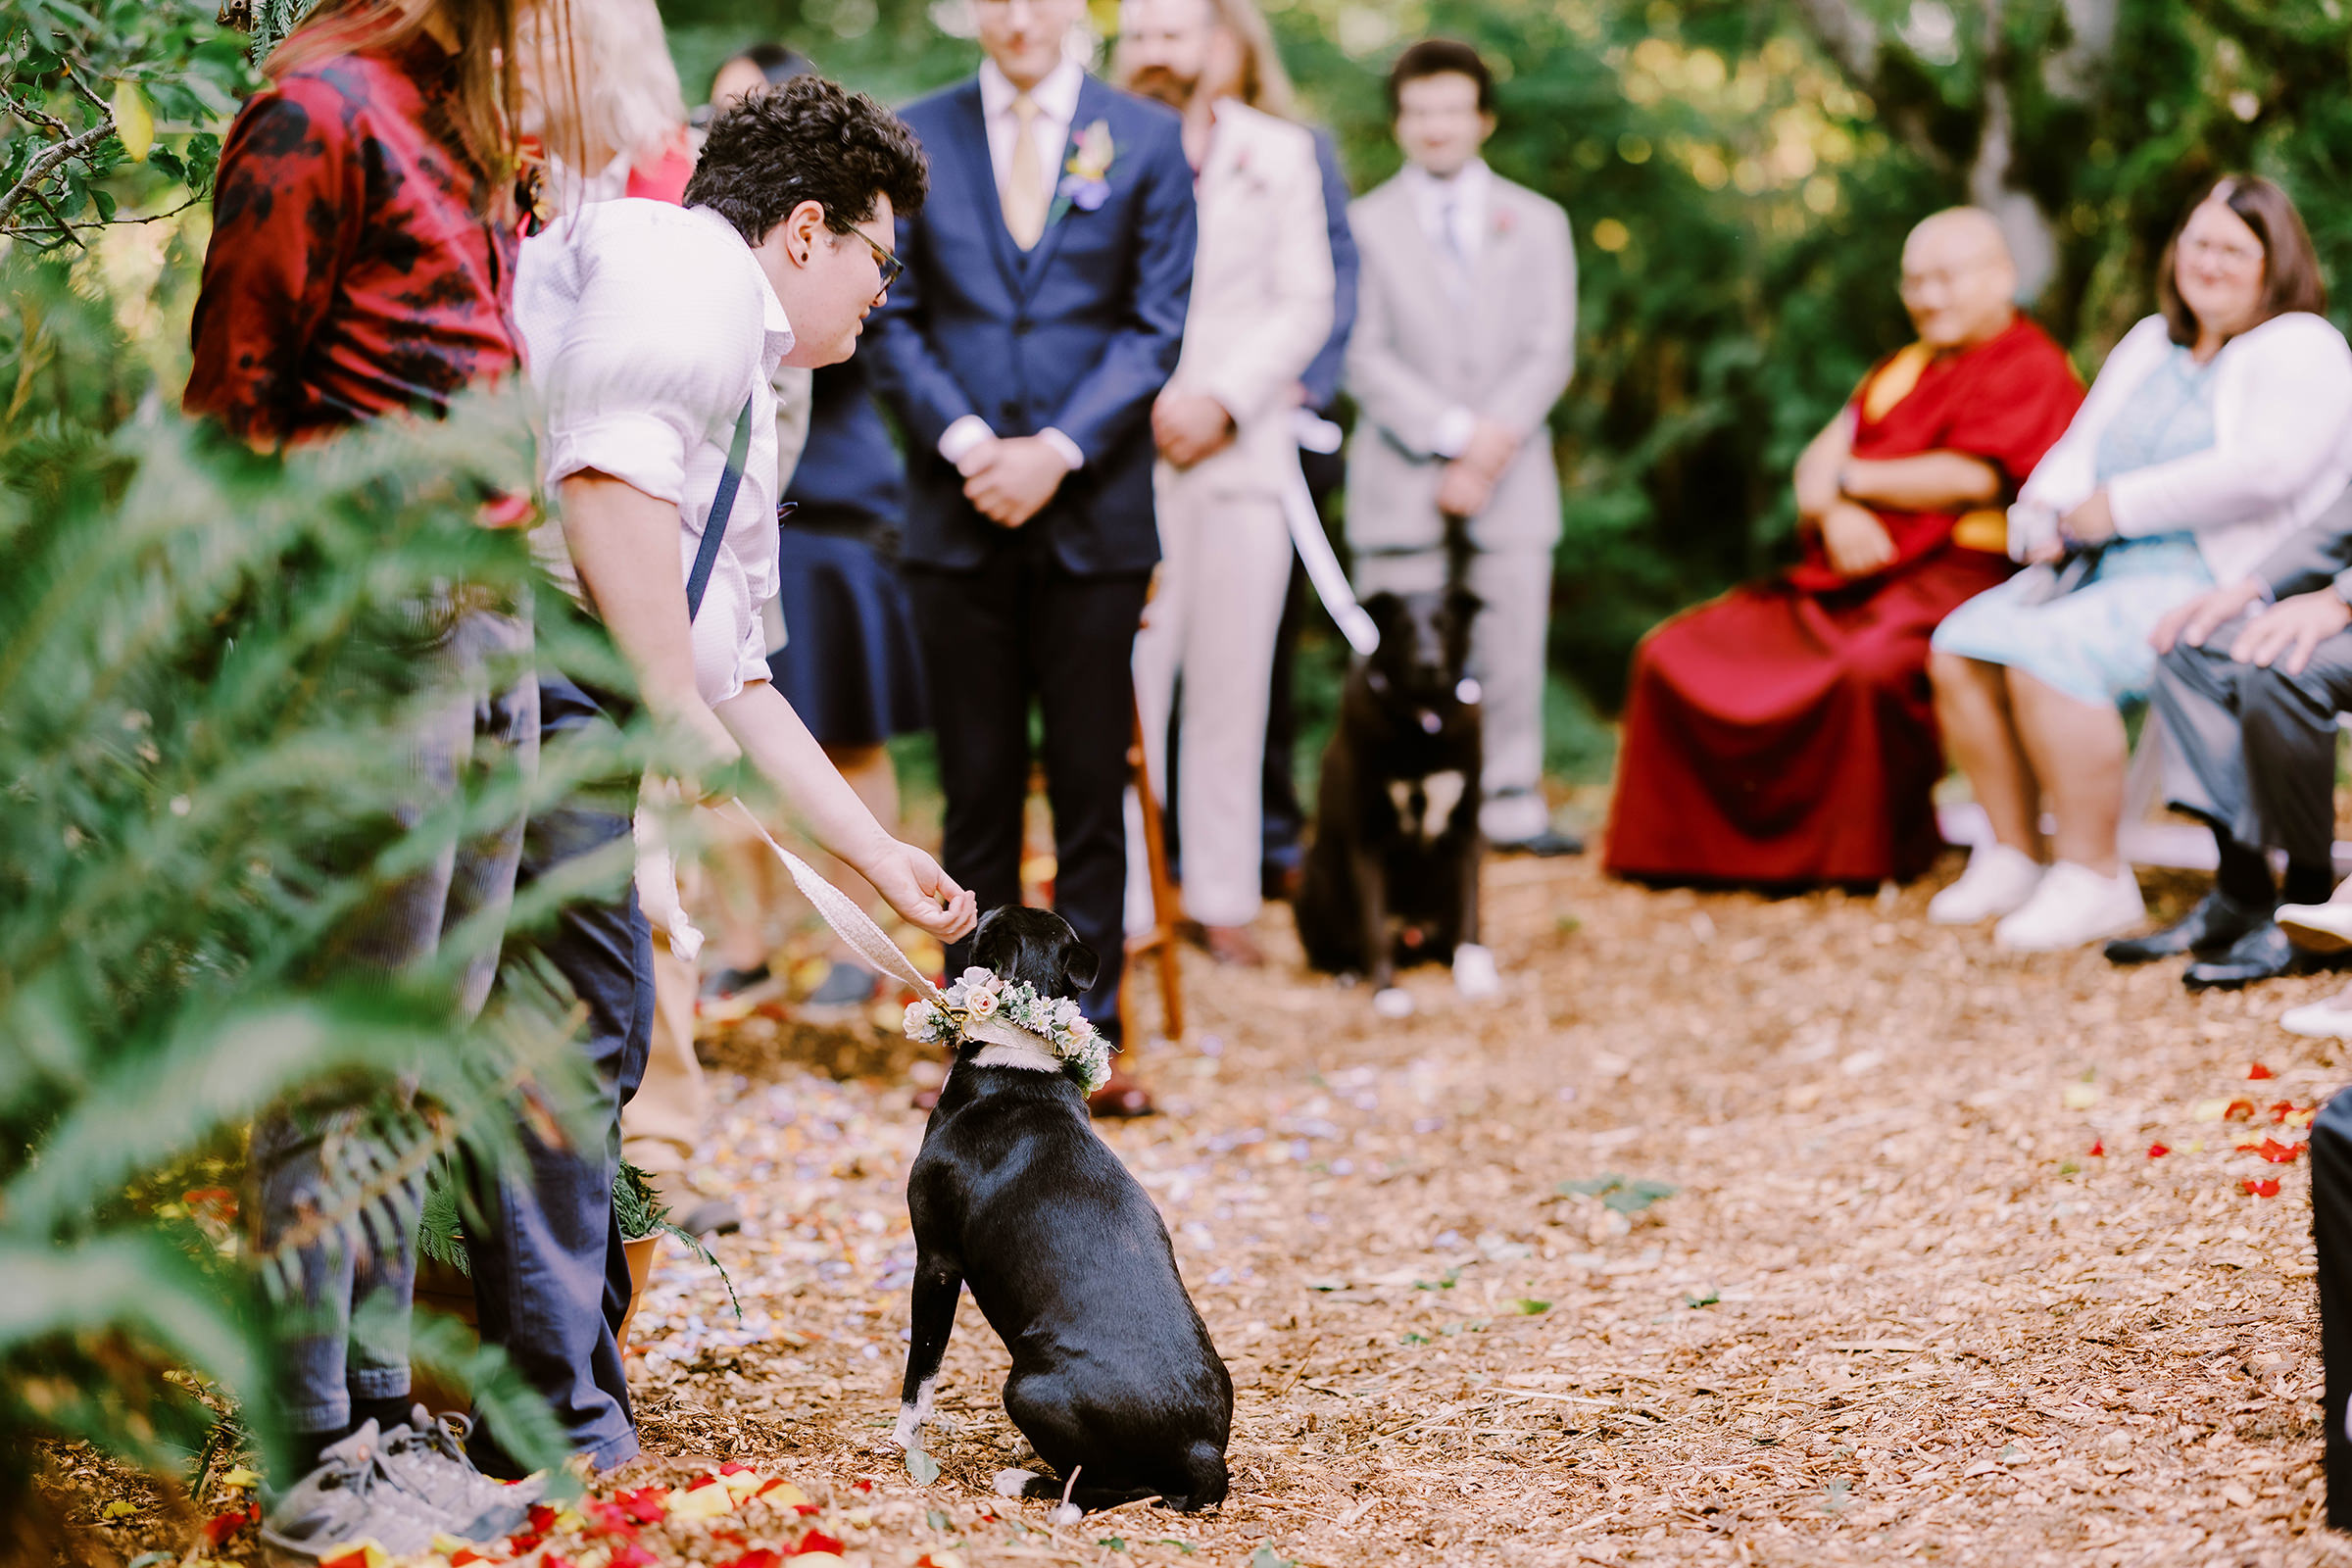 Annika and Sean's dog at their intimate backyard wedding ceremony.